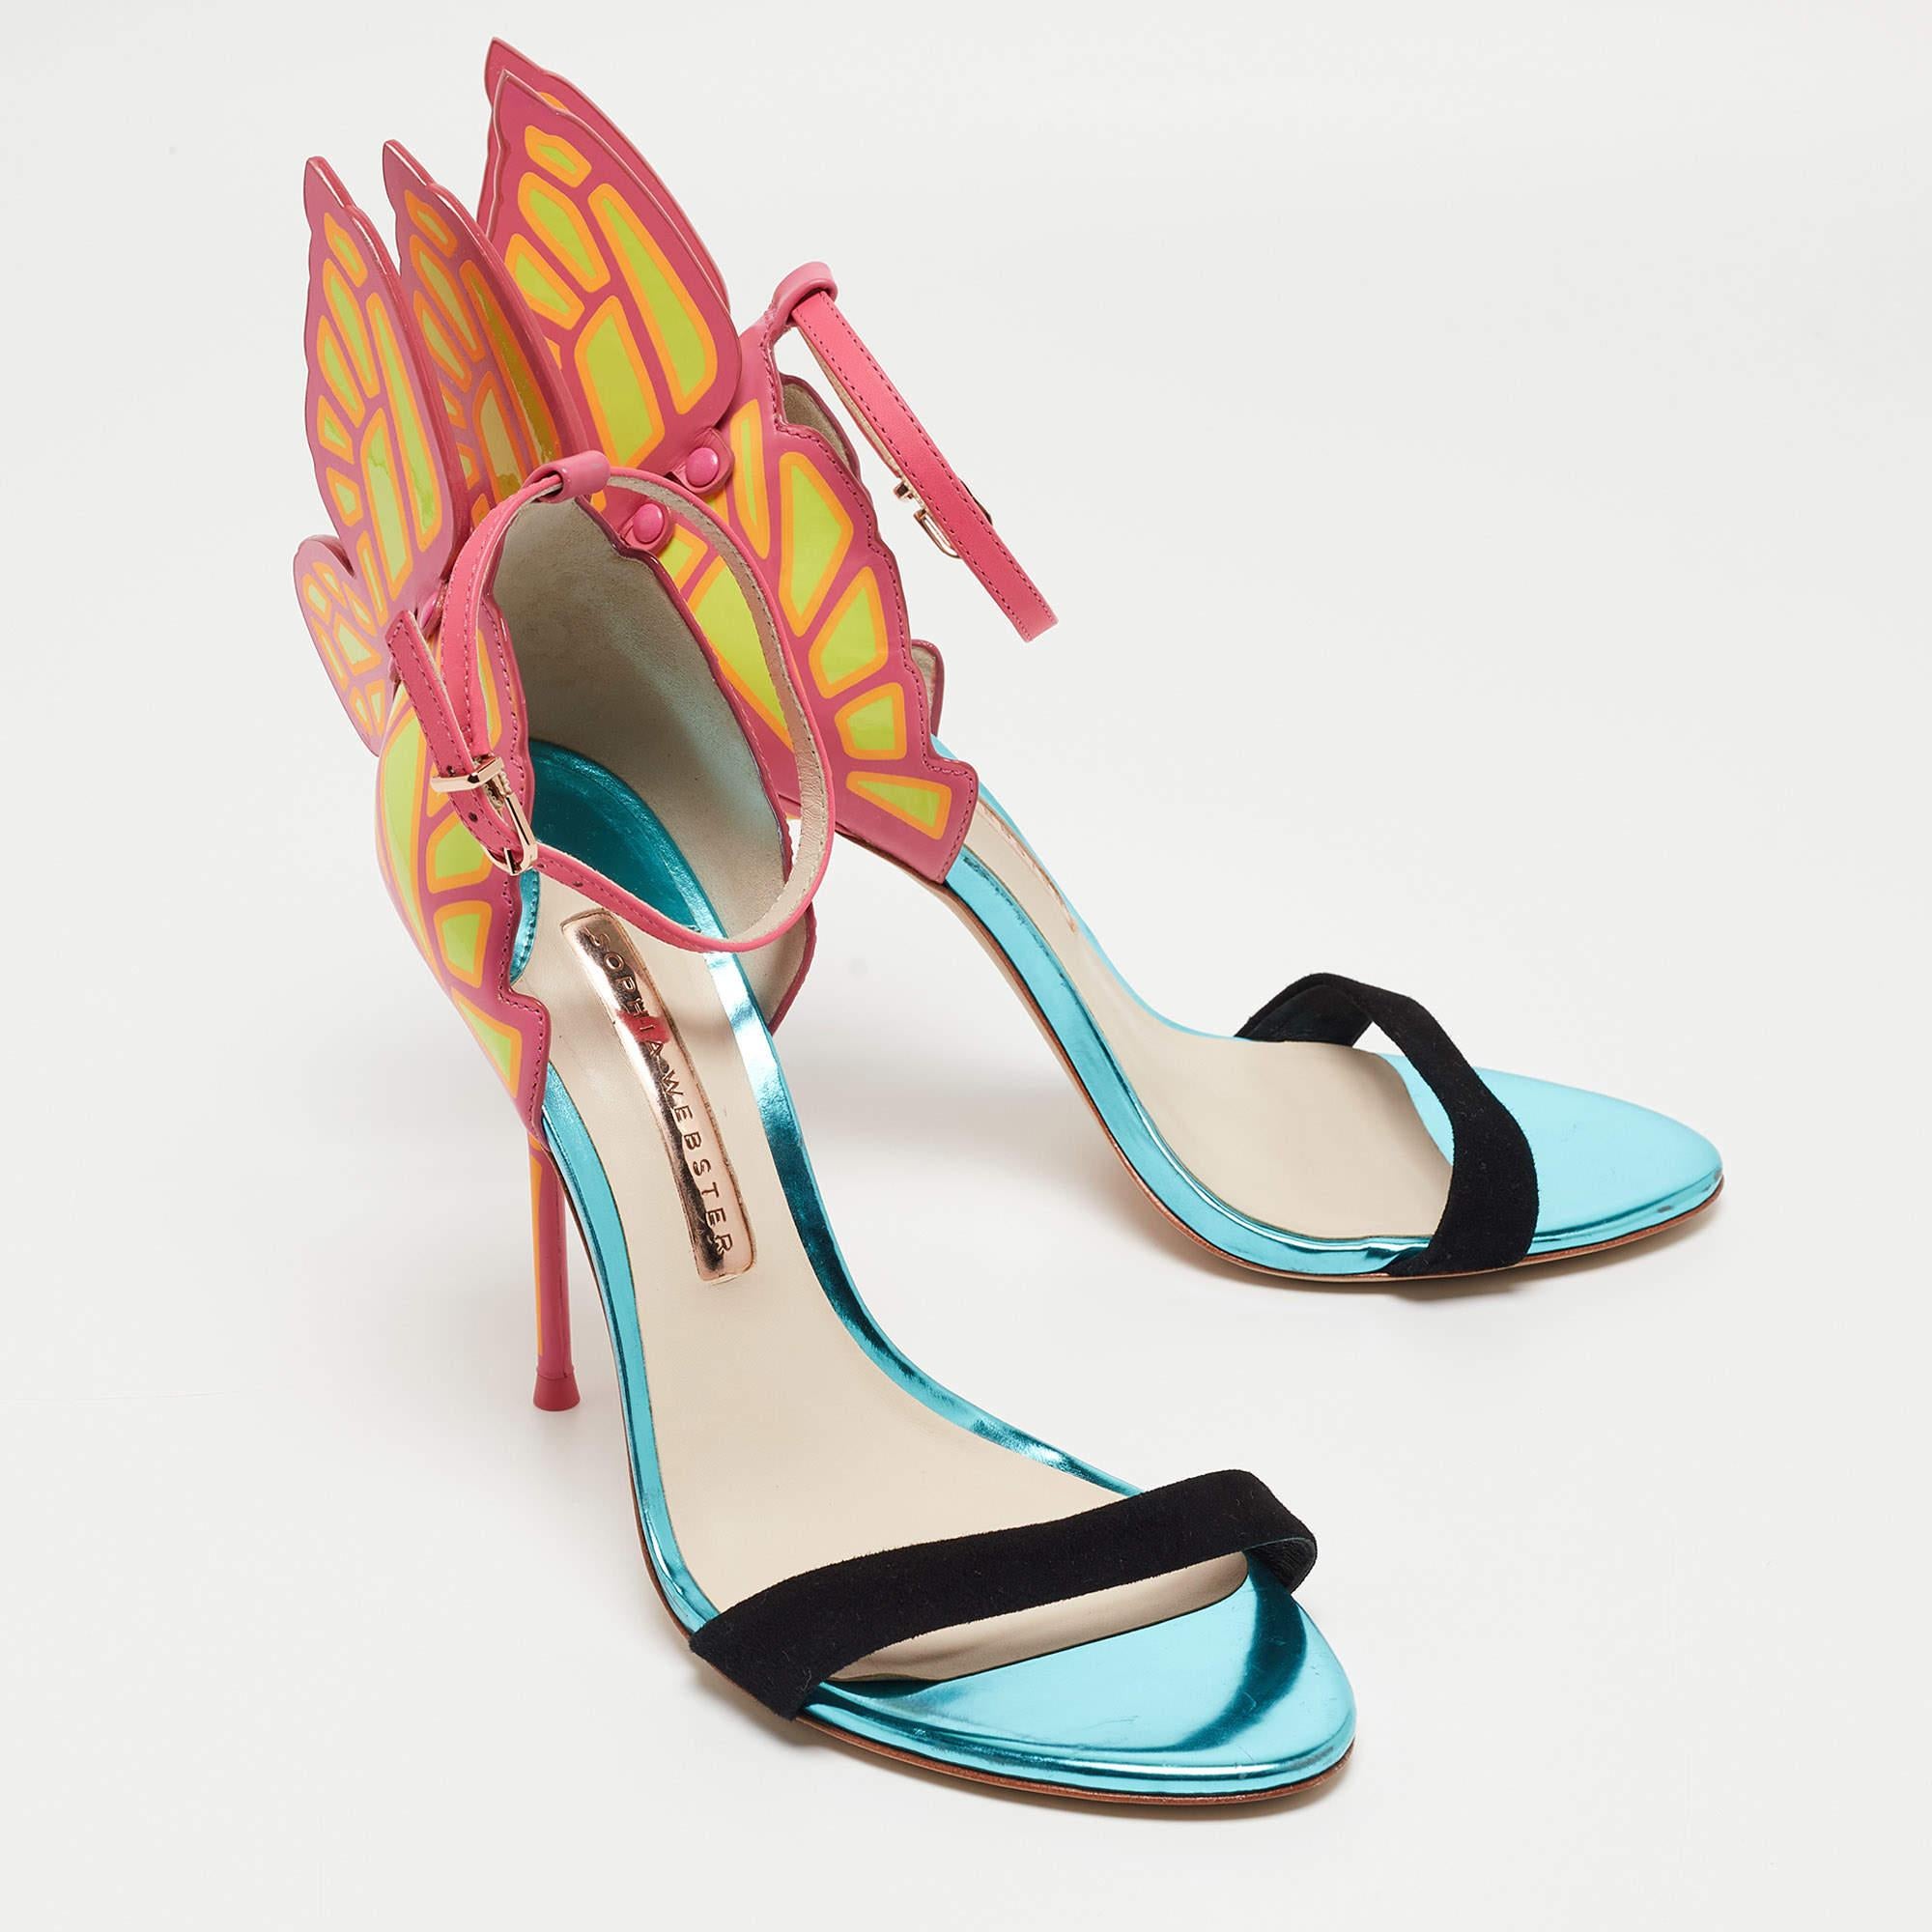 Sophia Webster Multicolor Patent Leather and Suede Chiara Butterfly Ankle Strap  In Good Condition For Sale In Dubai, Al Qouz 2